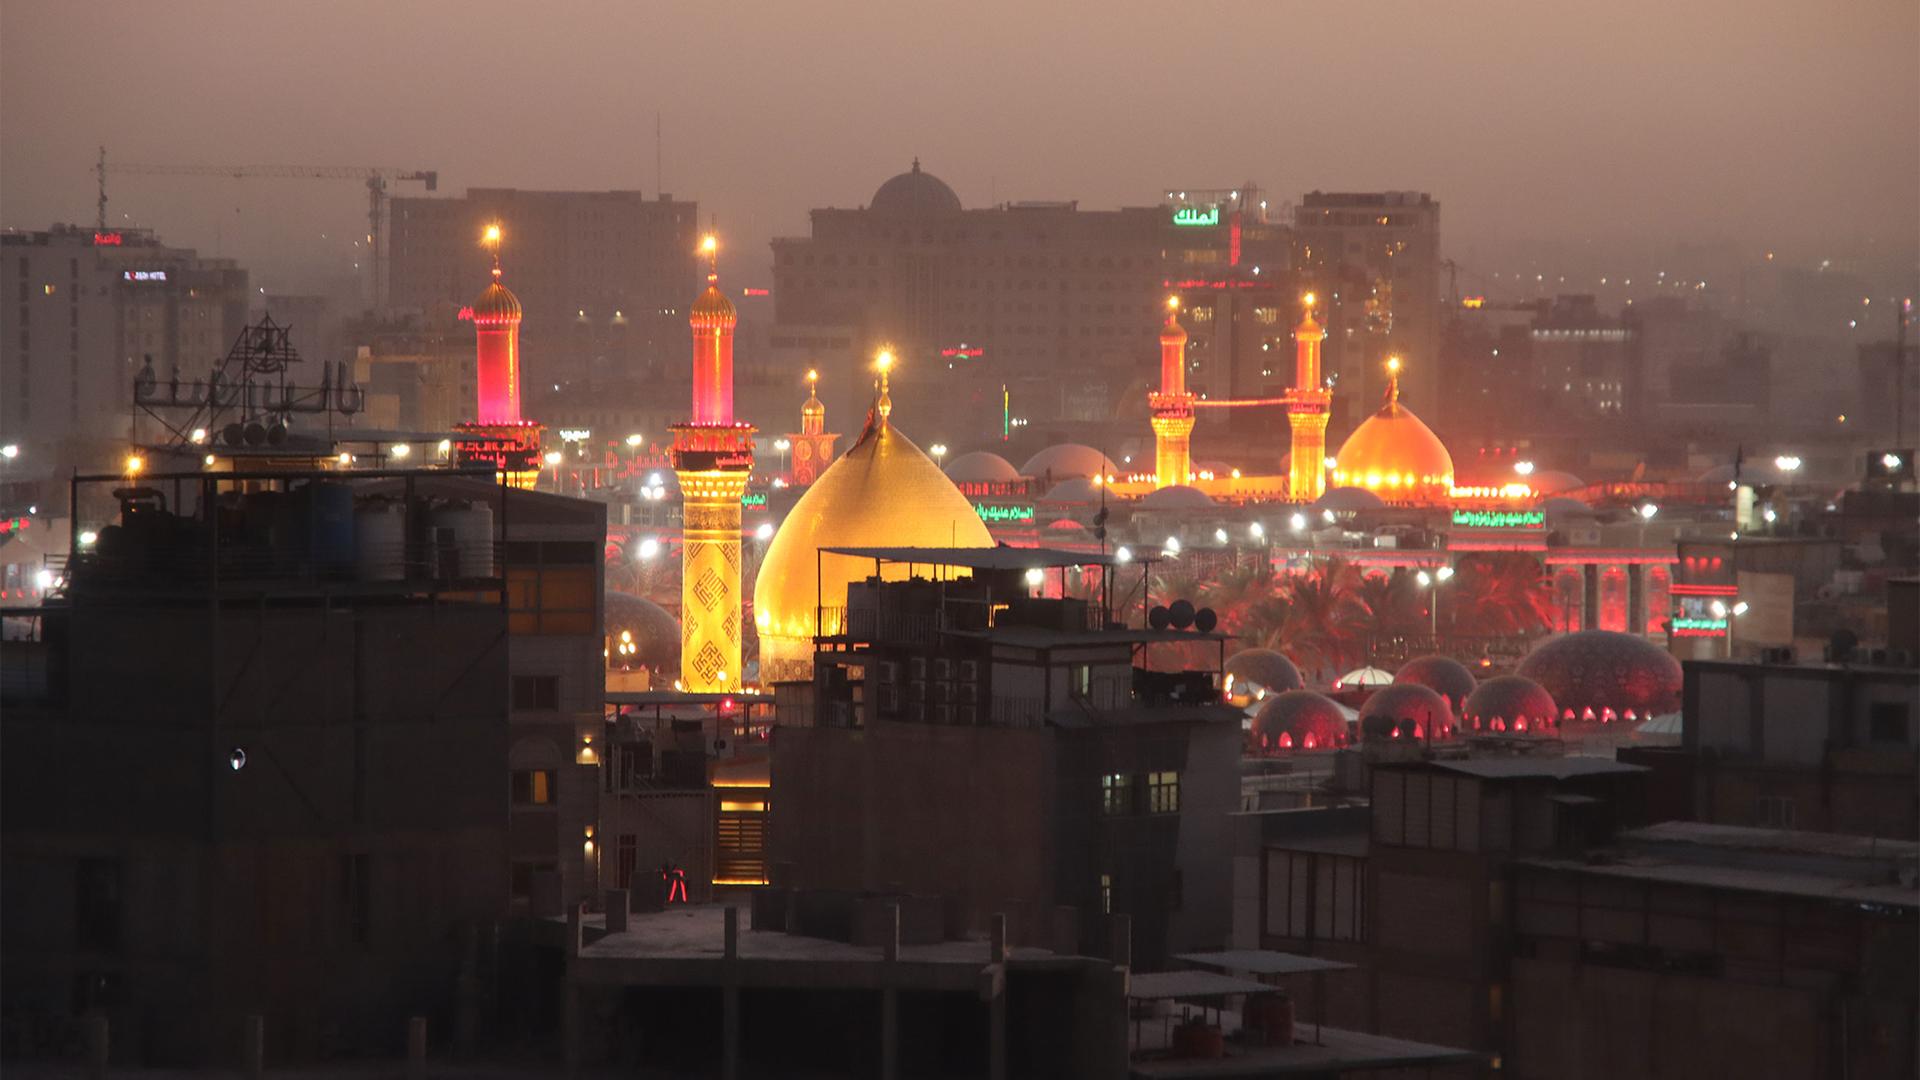 The shrines of Imam Husayn and his brother Aba Fadl Abbas in Karbala, Iraq, 2022.